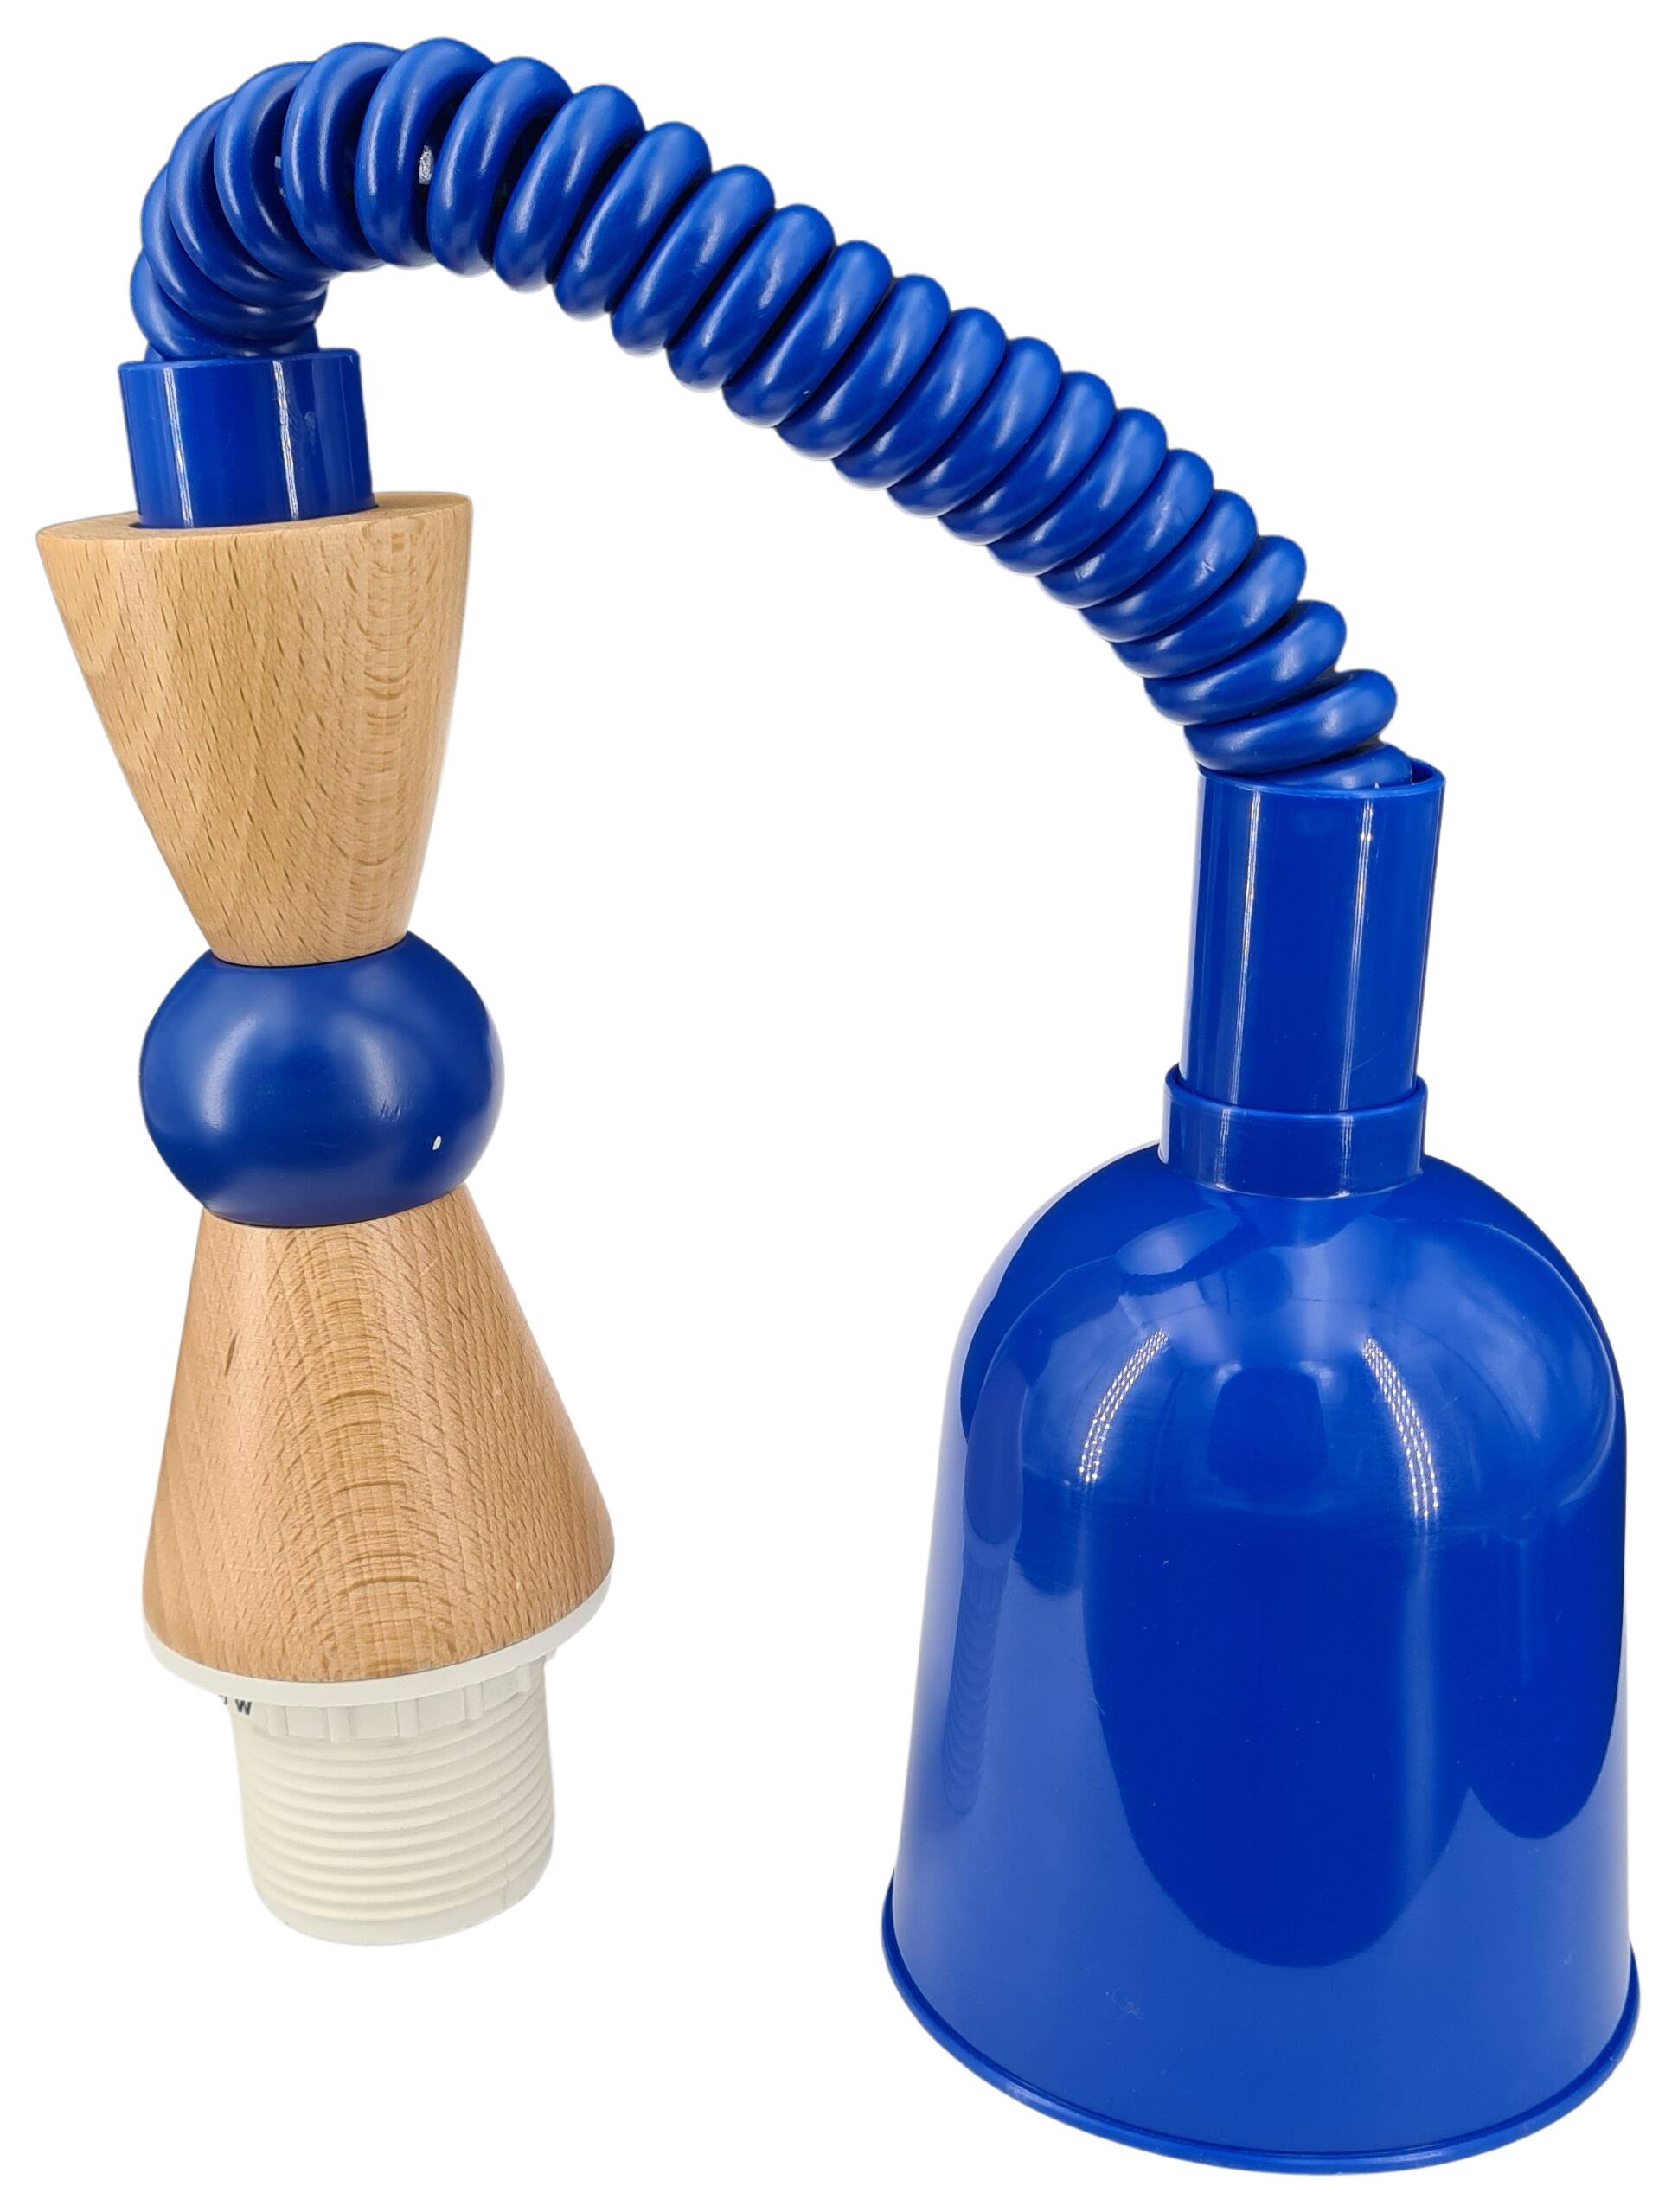 lift with wooden top CONE MEDIUM 30 77 01 blue